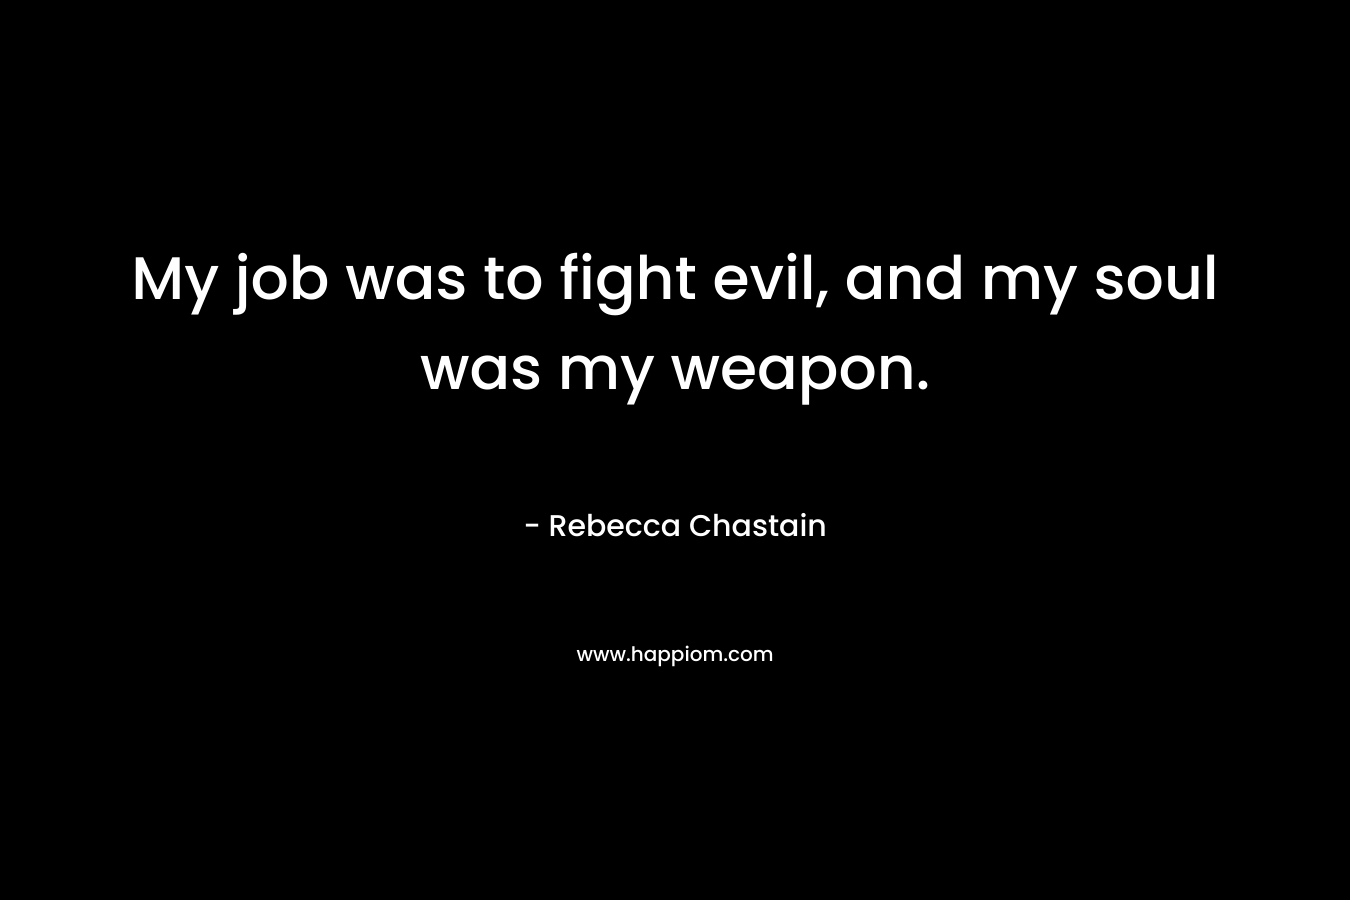 My job was to fight evil, and my soul was my weapon.